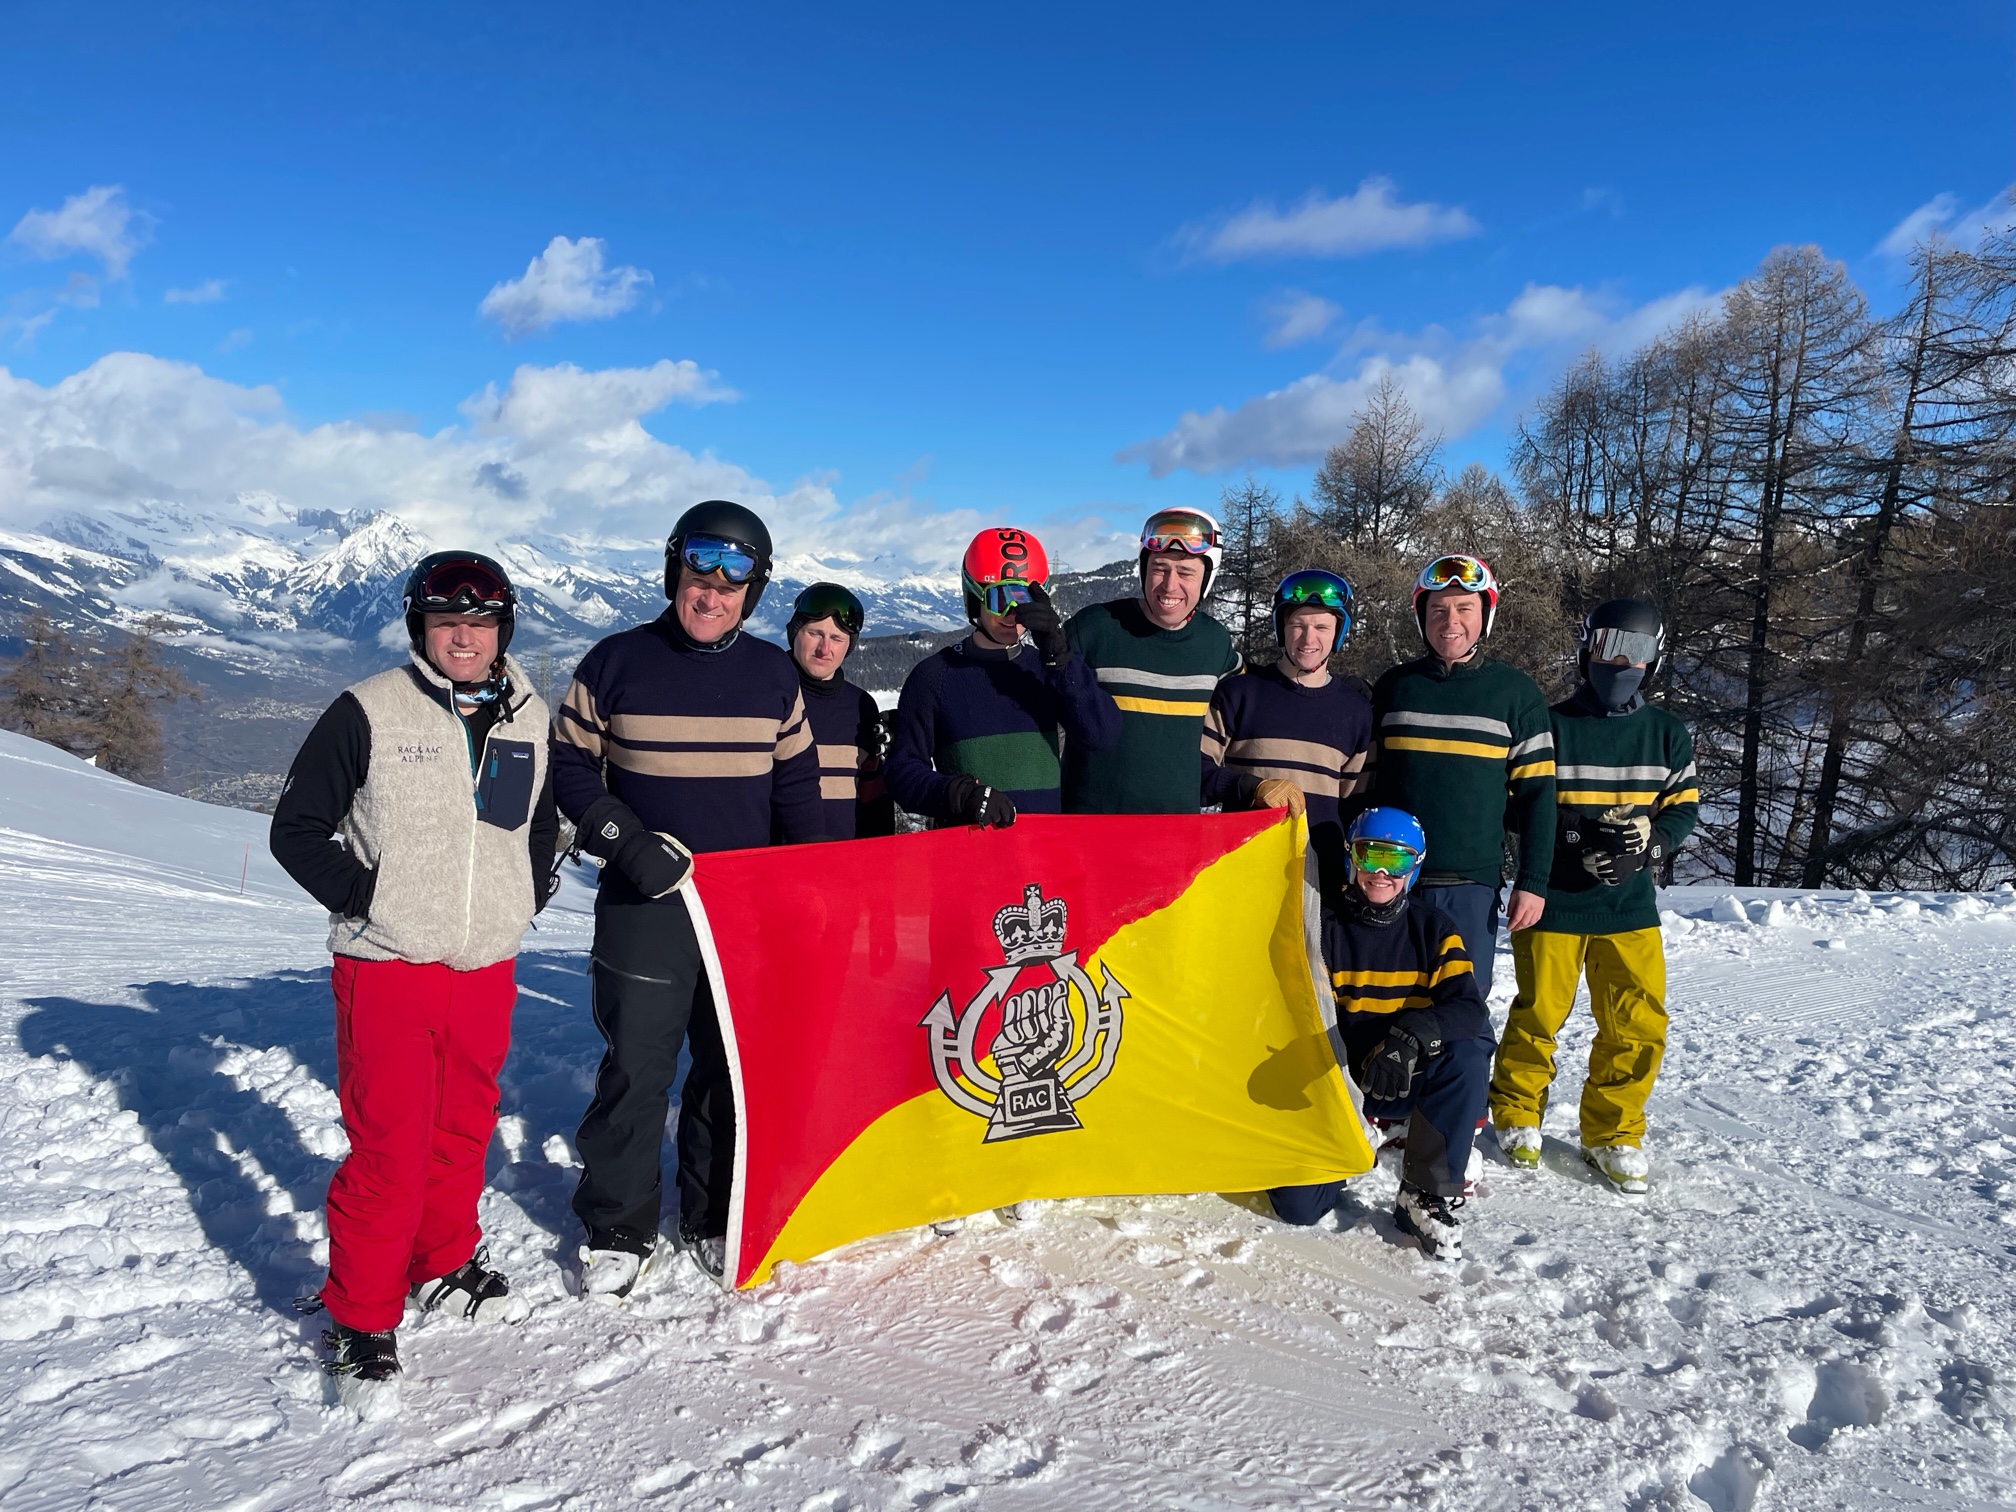 The Yeomanry team posing on the slopes in Verbier.